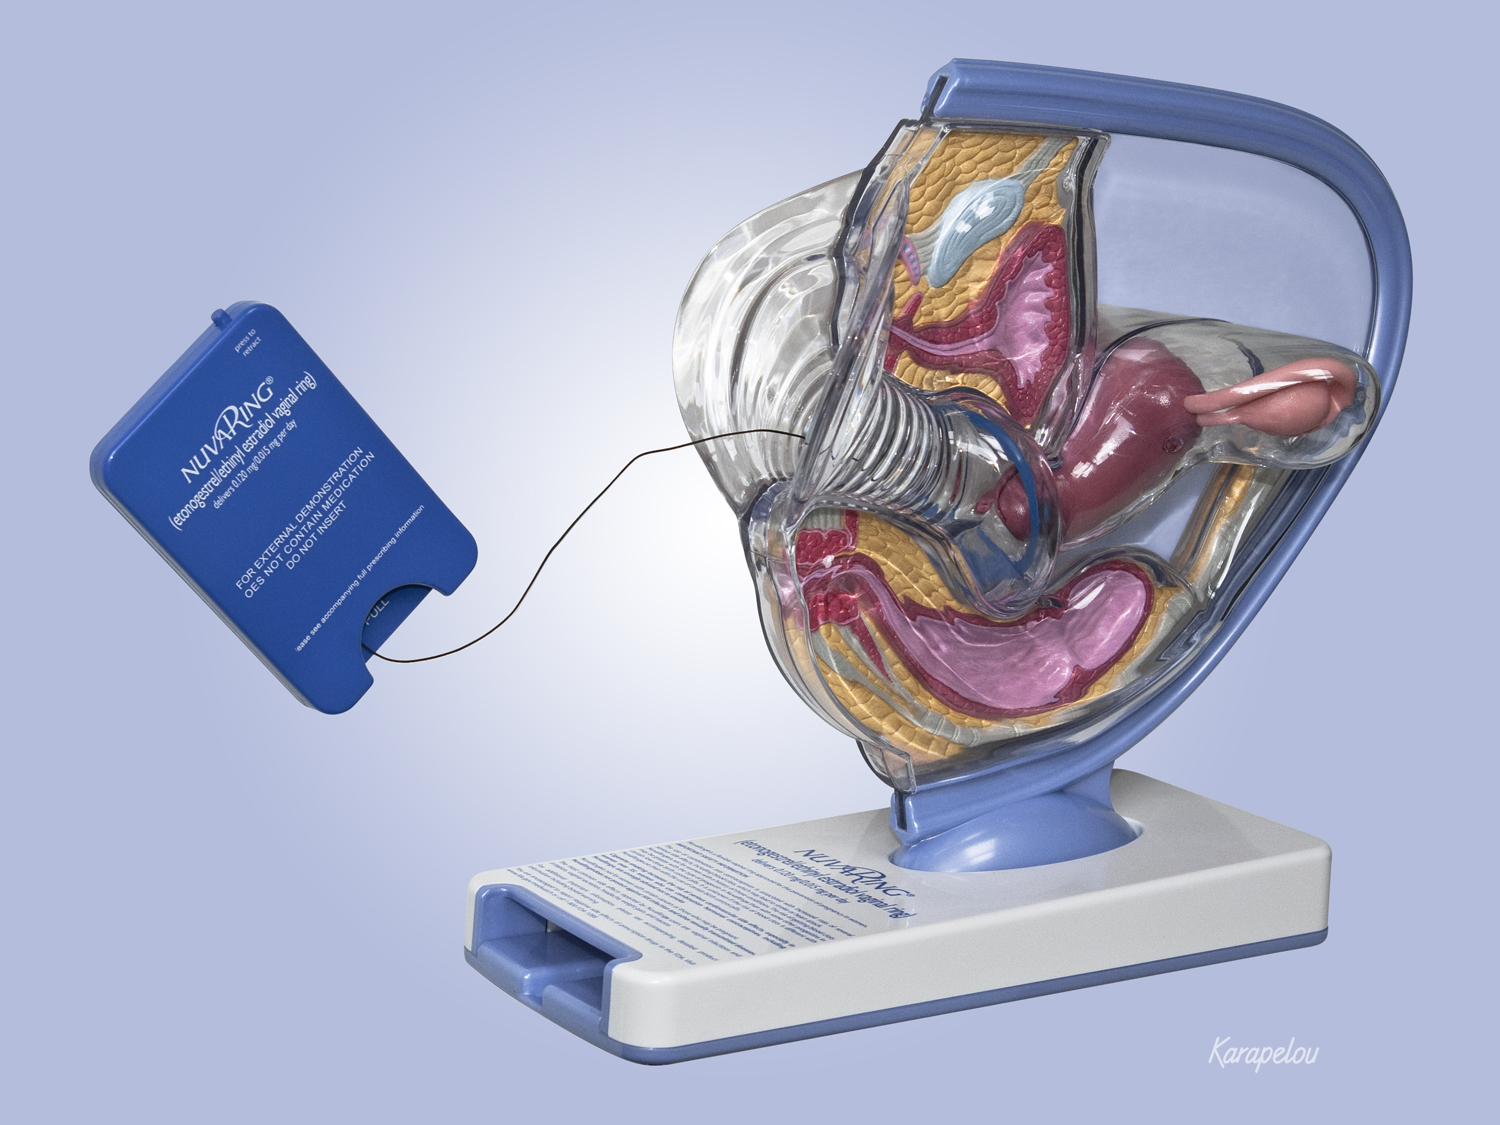 Anatomical model for demonstration of NuvaRing contraceptive product. Anatomical design by John W. Karapelou, CMI